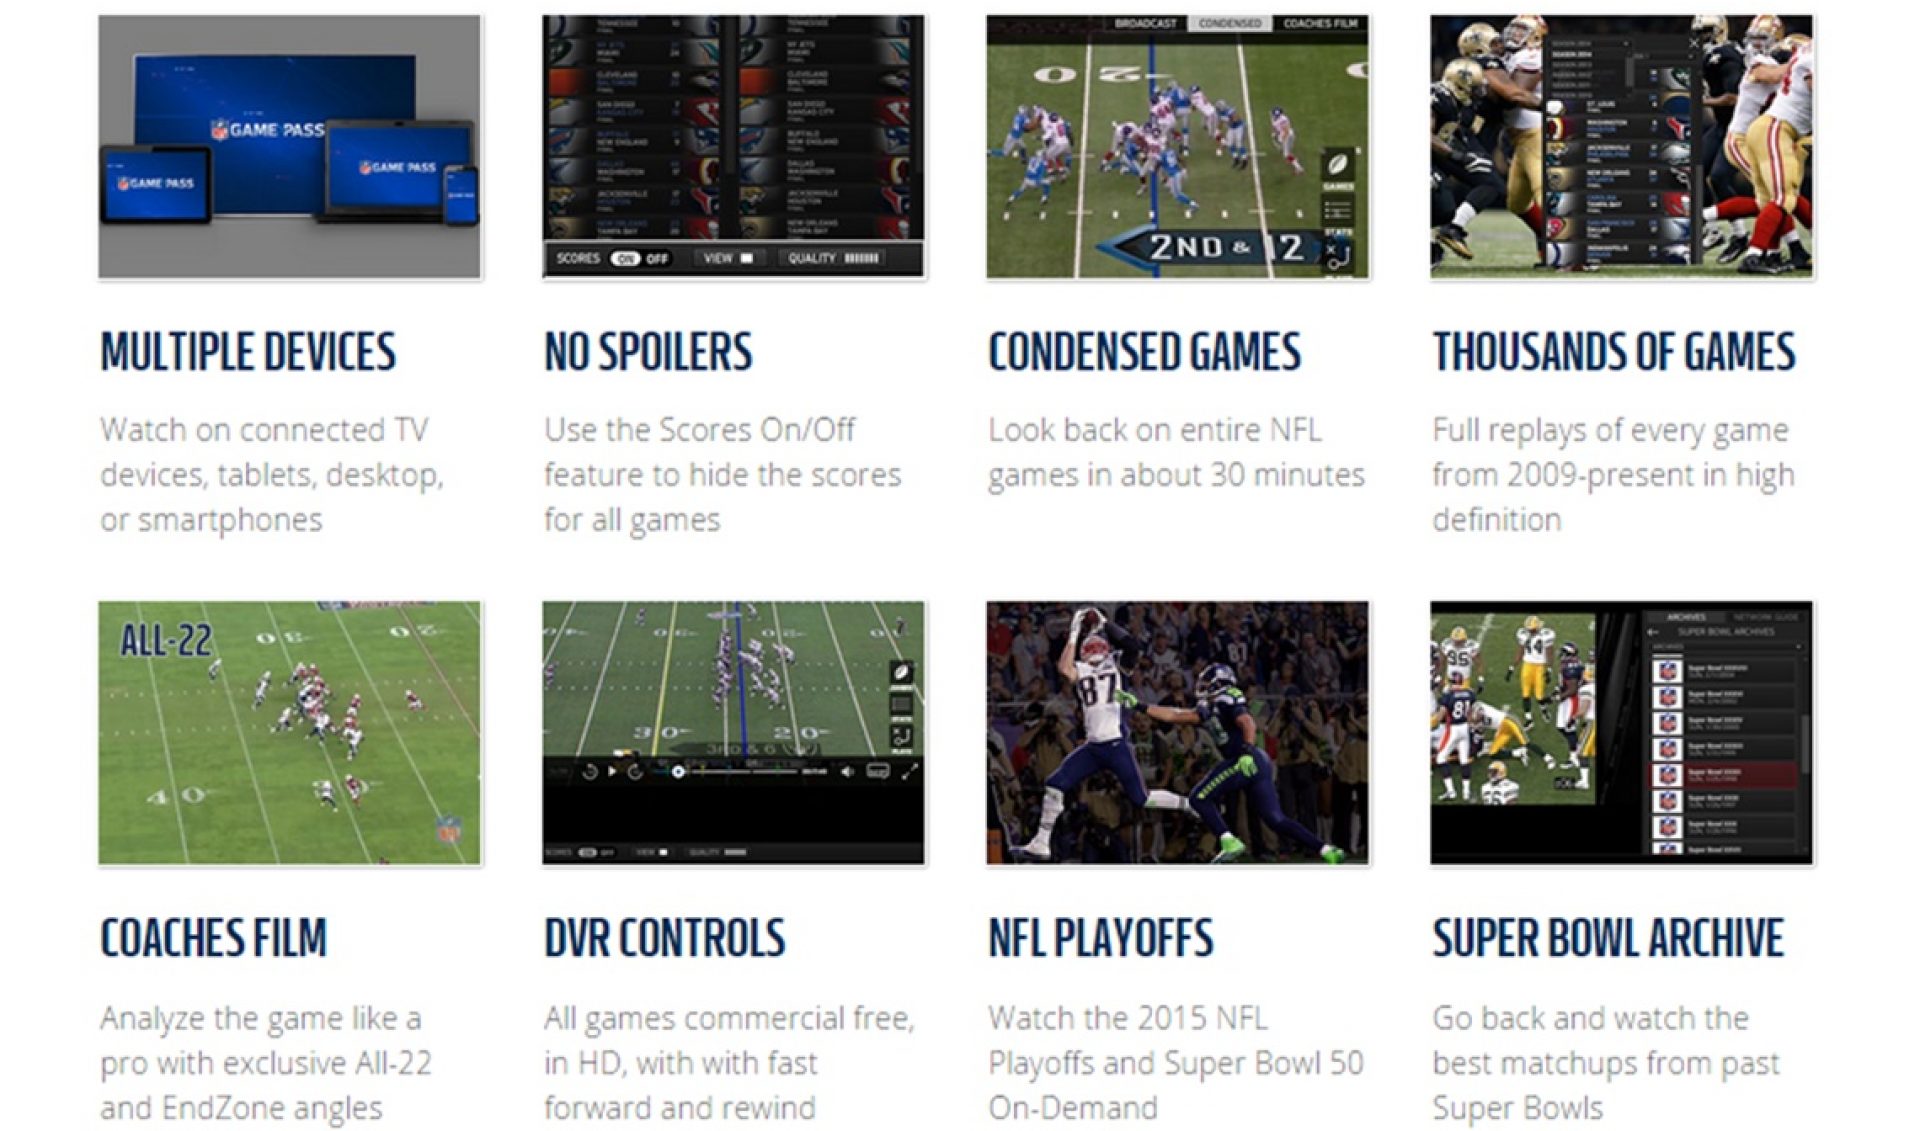 nfl game pass weekly pro